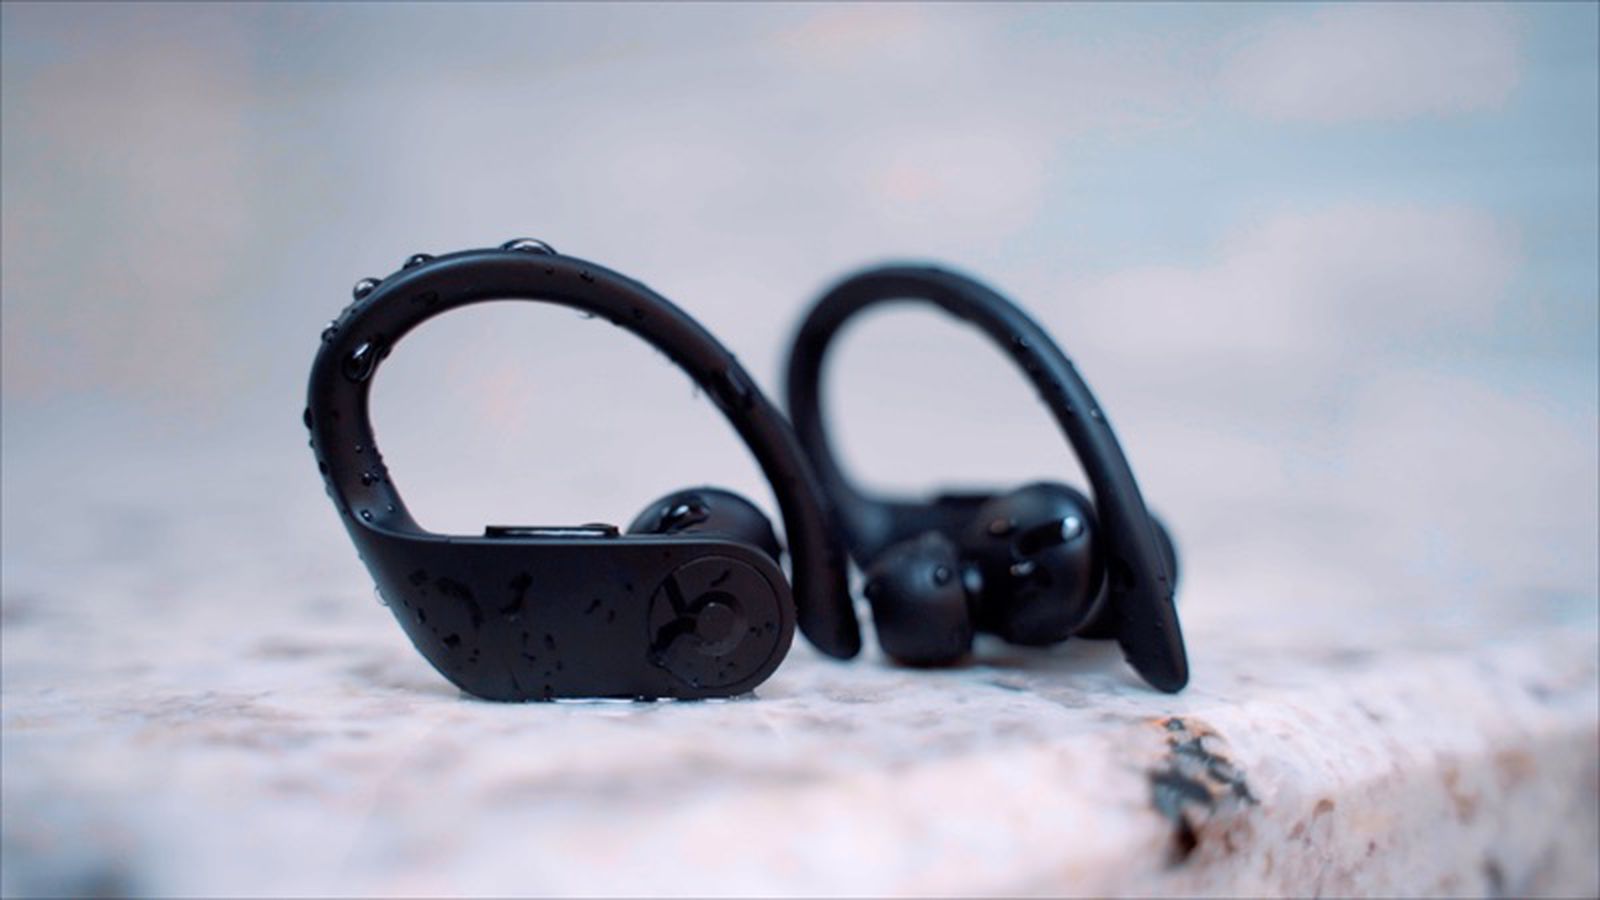 Powerbeats Pro Water Resistance Find Out What Happens if You Drop Apple's Newest Earbuds in the Toilet - MacRumors